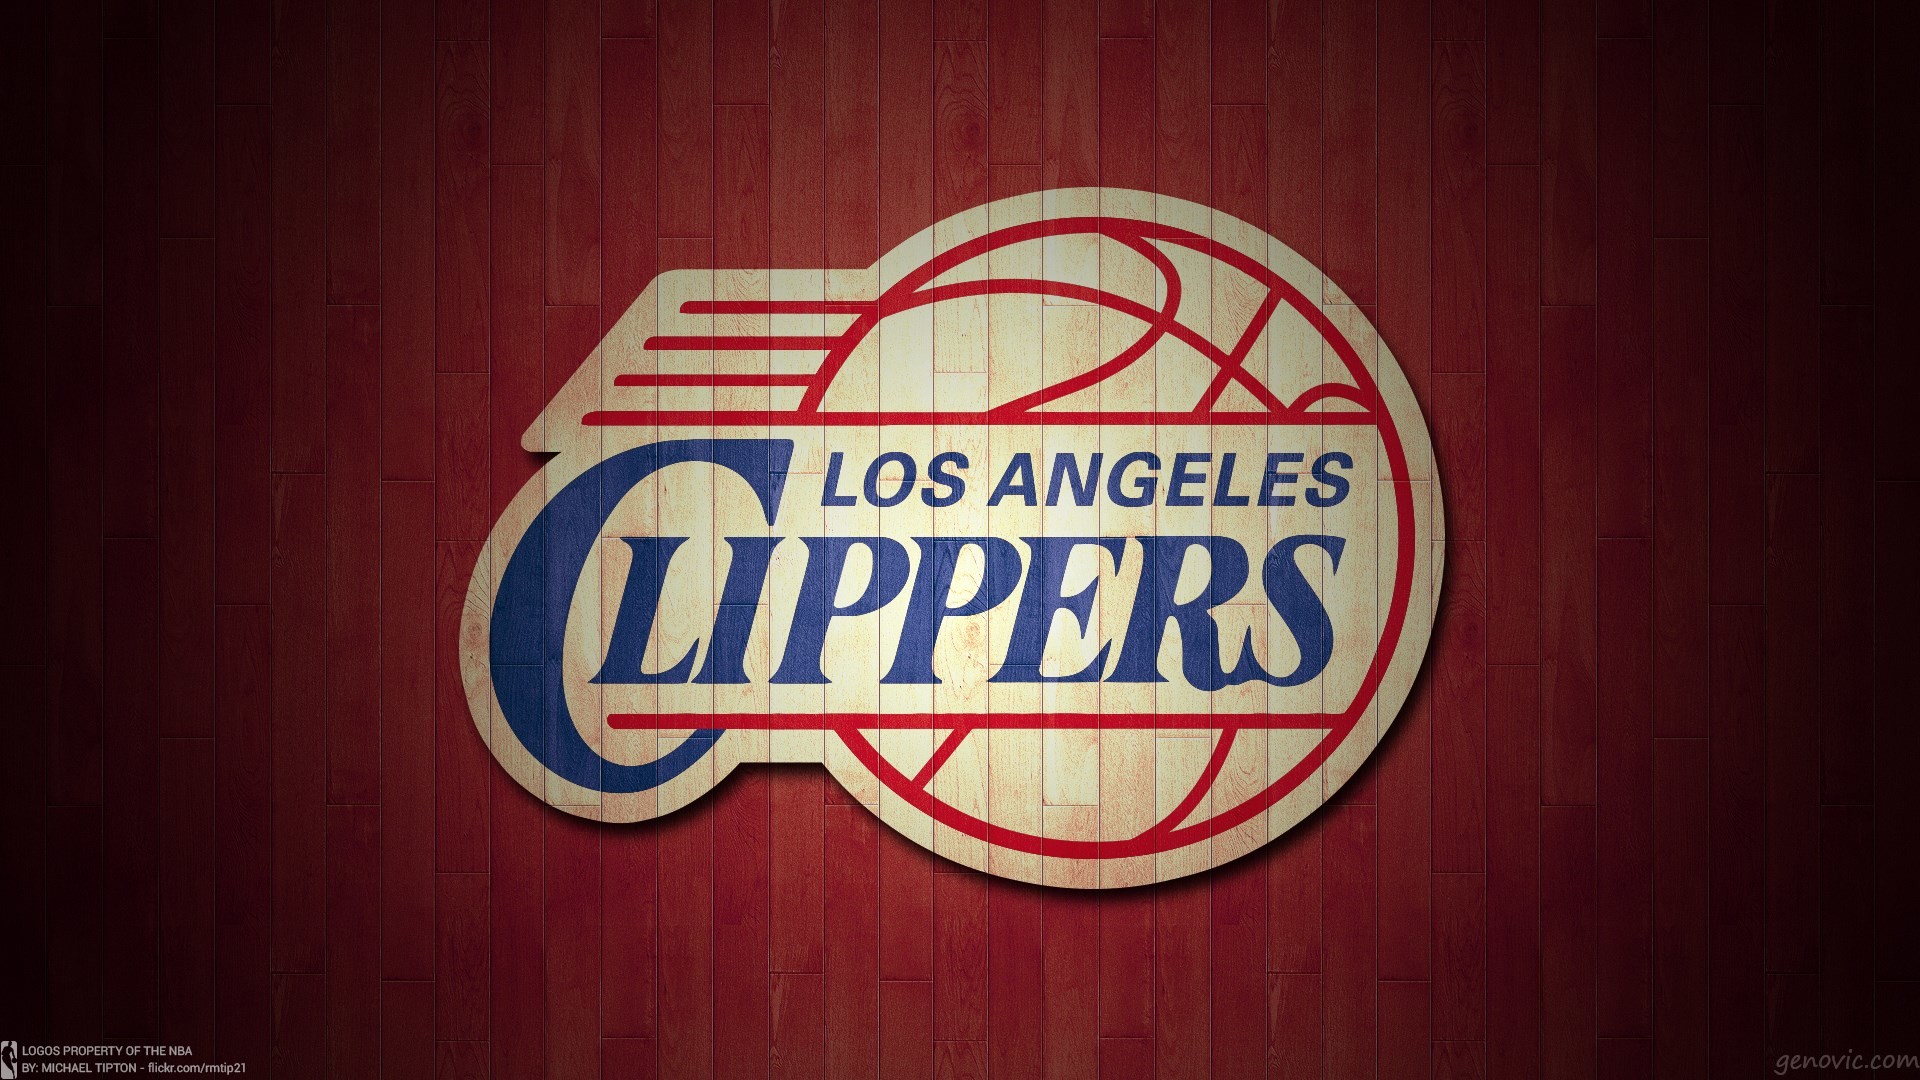 1920x1080 LOS ANGELES CLIPPERS basketball nba (33) wallpaper background